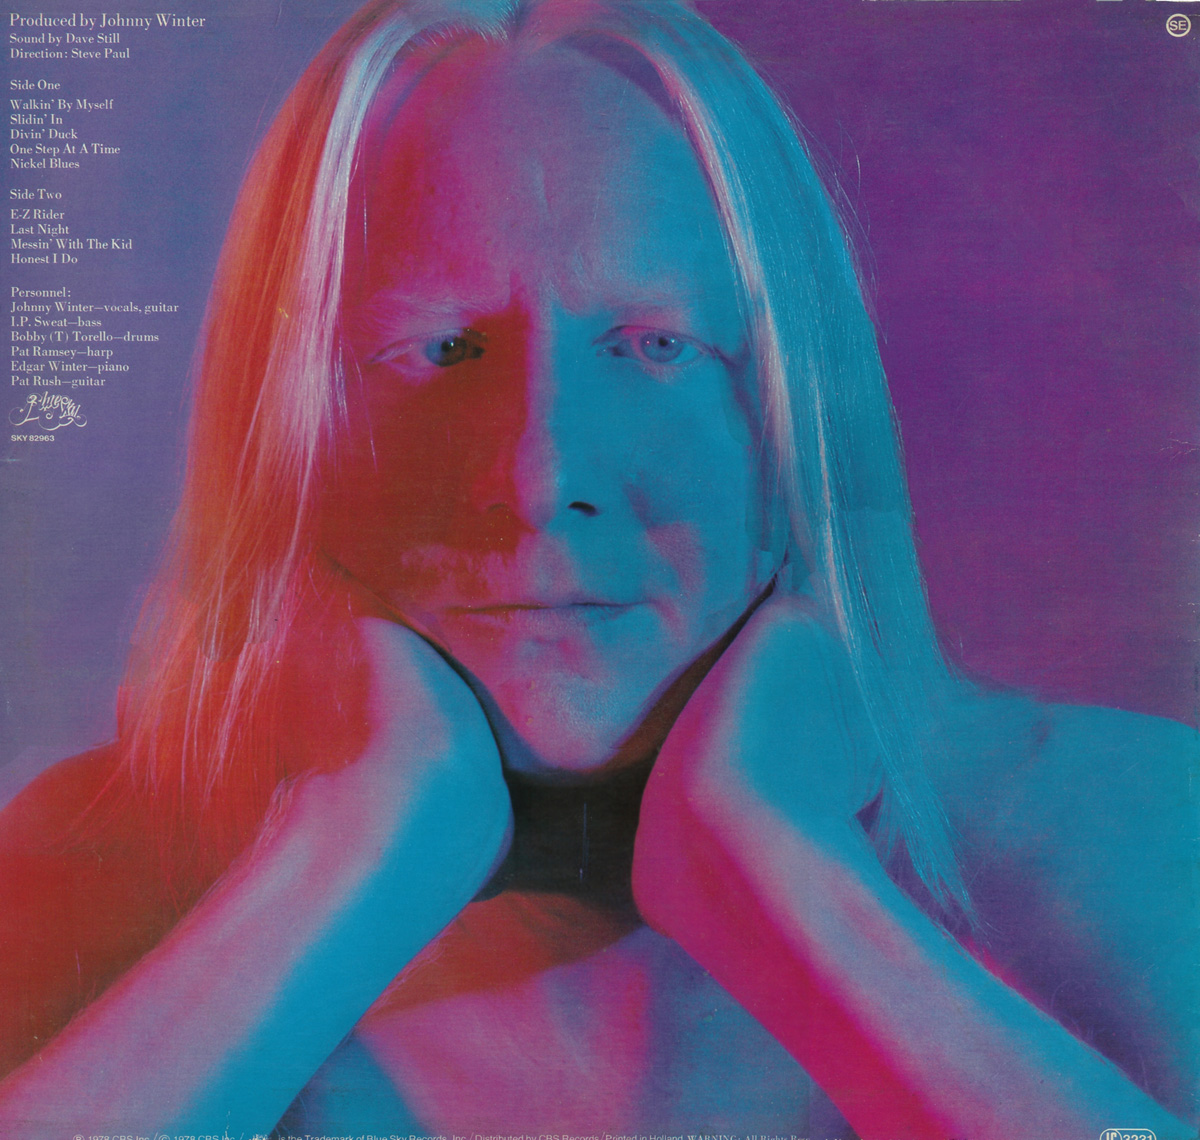 JOHNNY WINTER - White Hot And Blue back cover